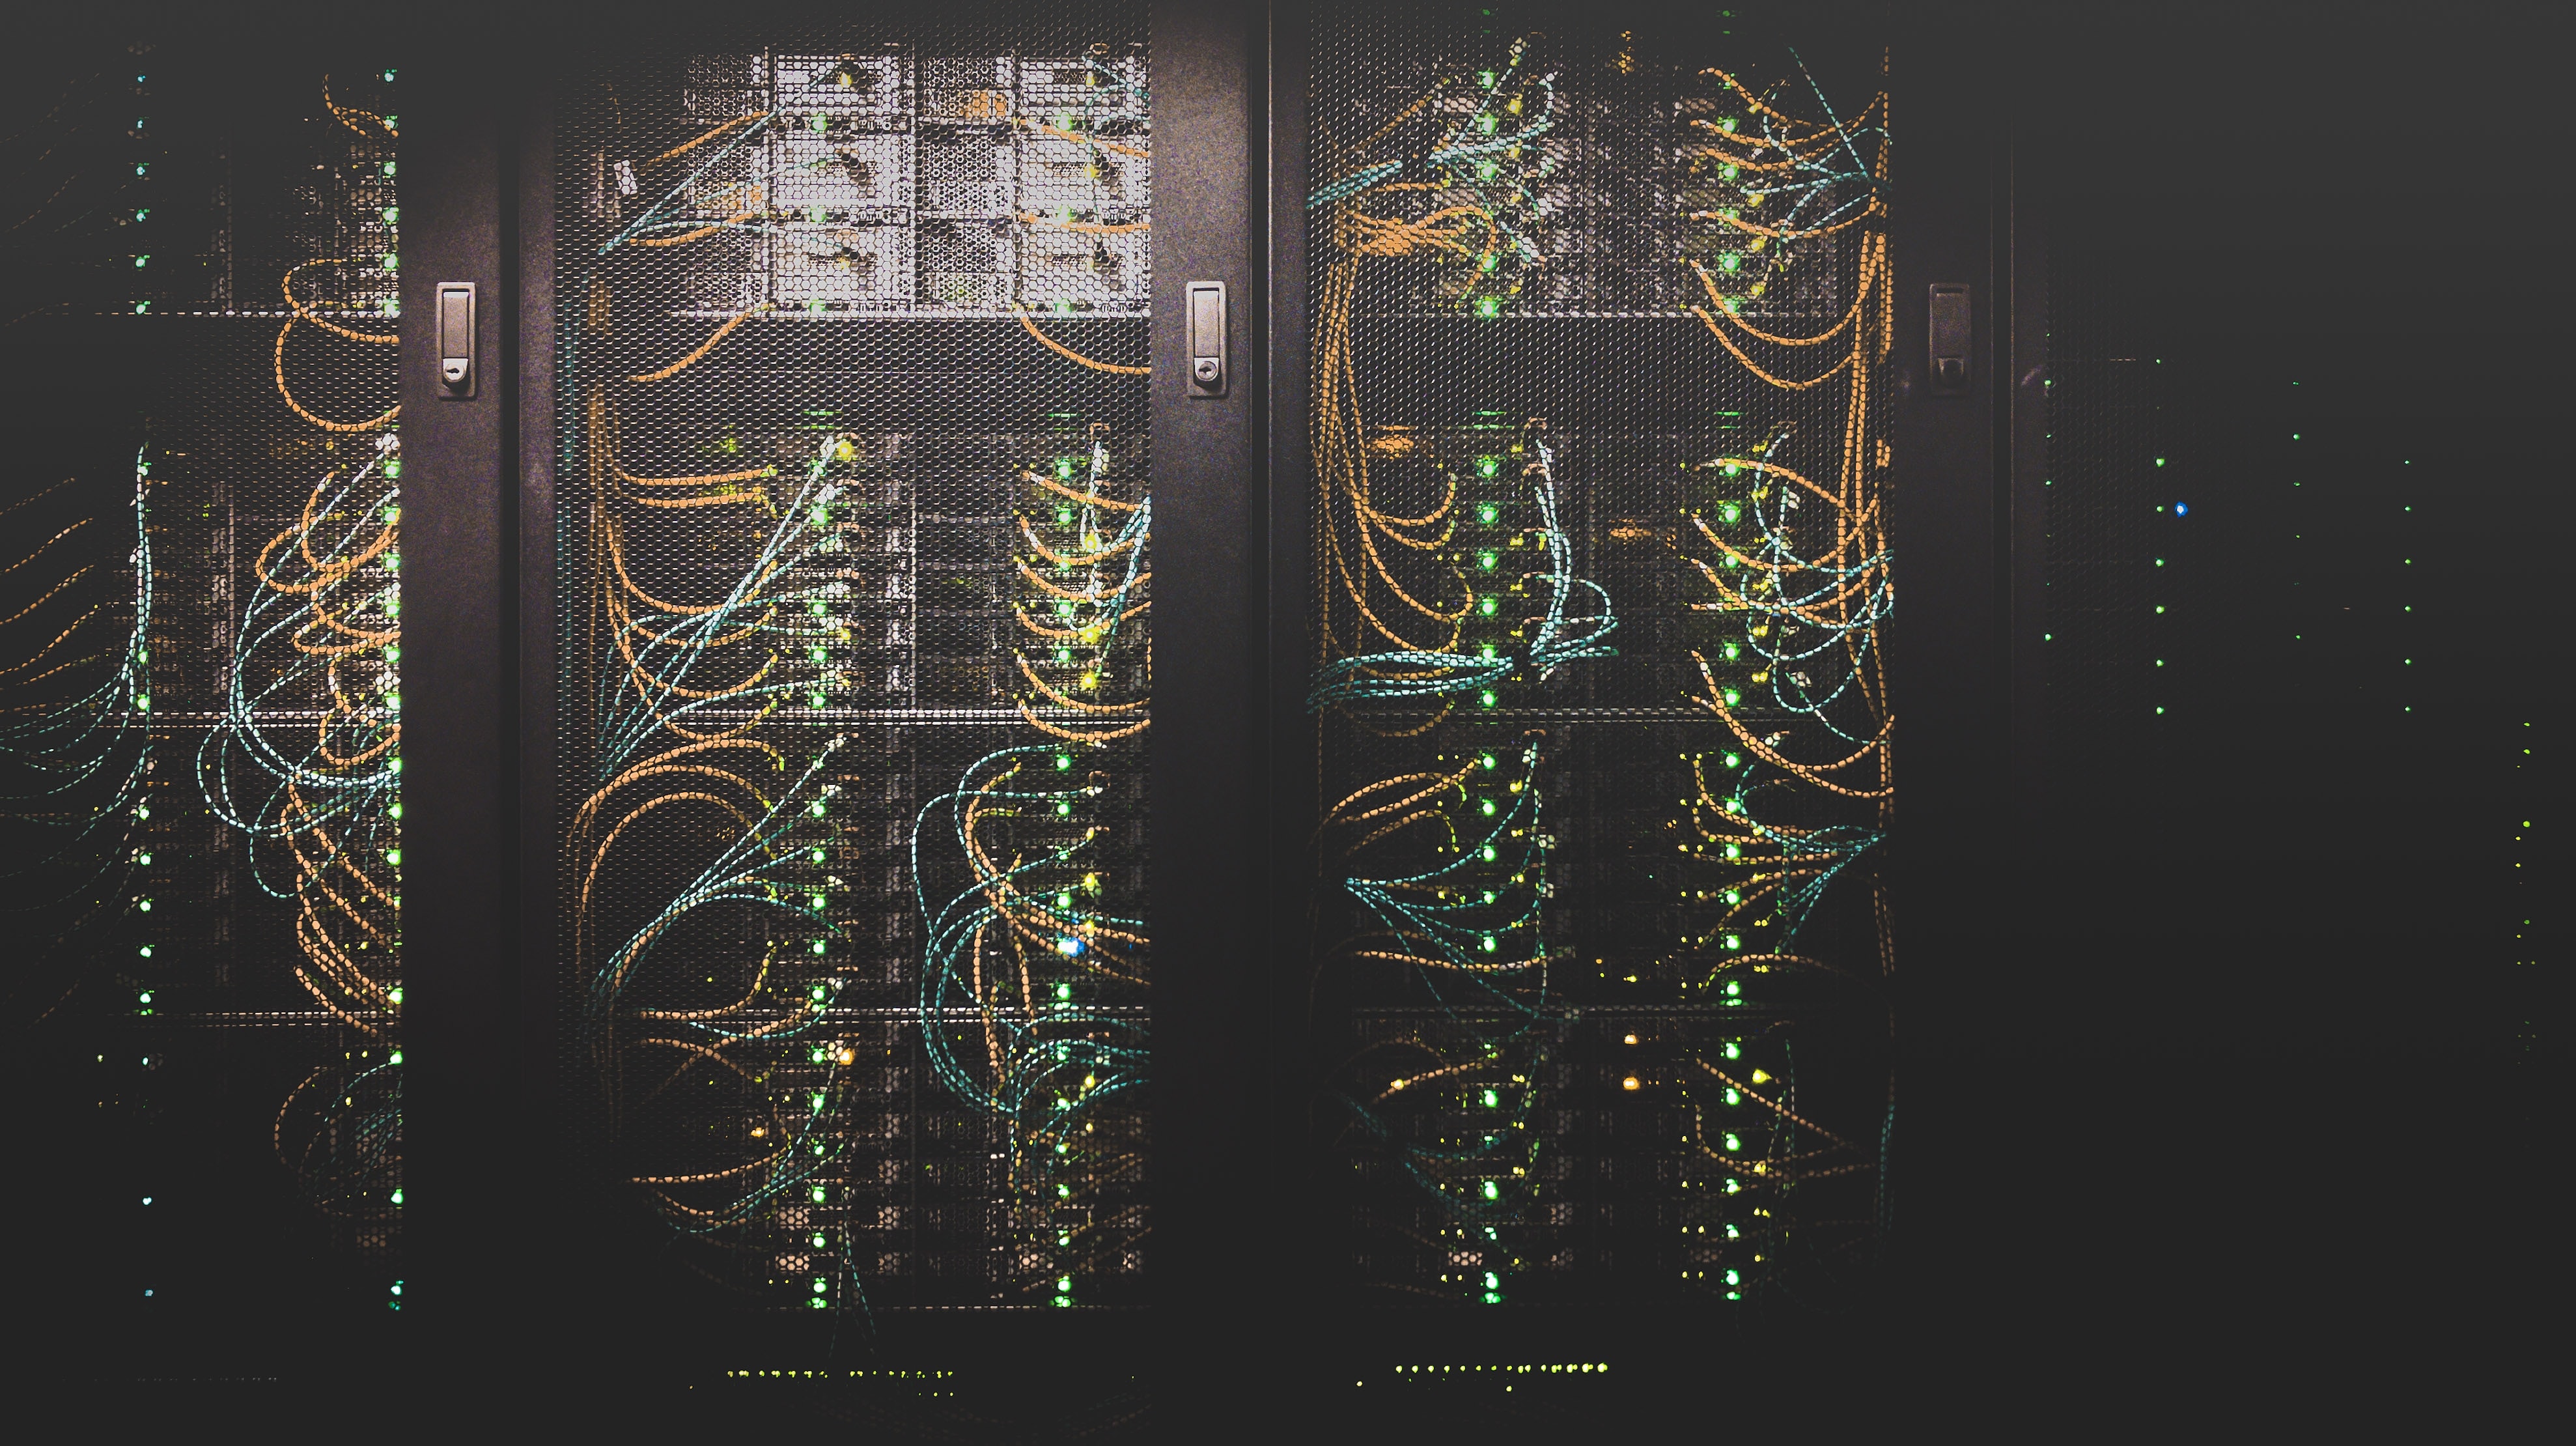 An image of a server rack, with the mesh doors closed. Many colored ethernet cables connect different components.